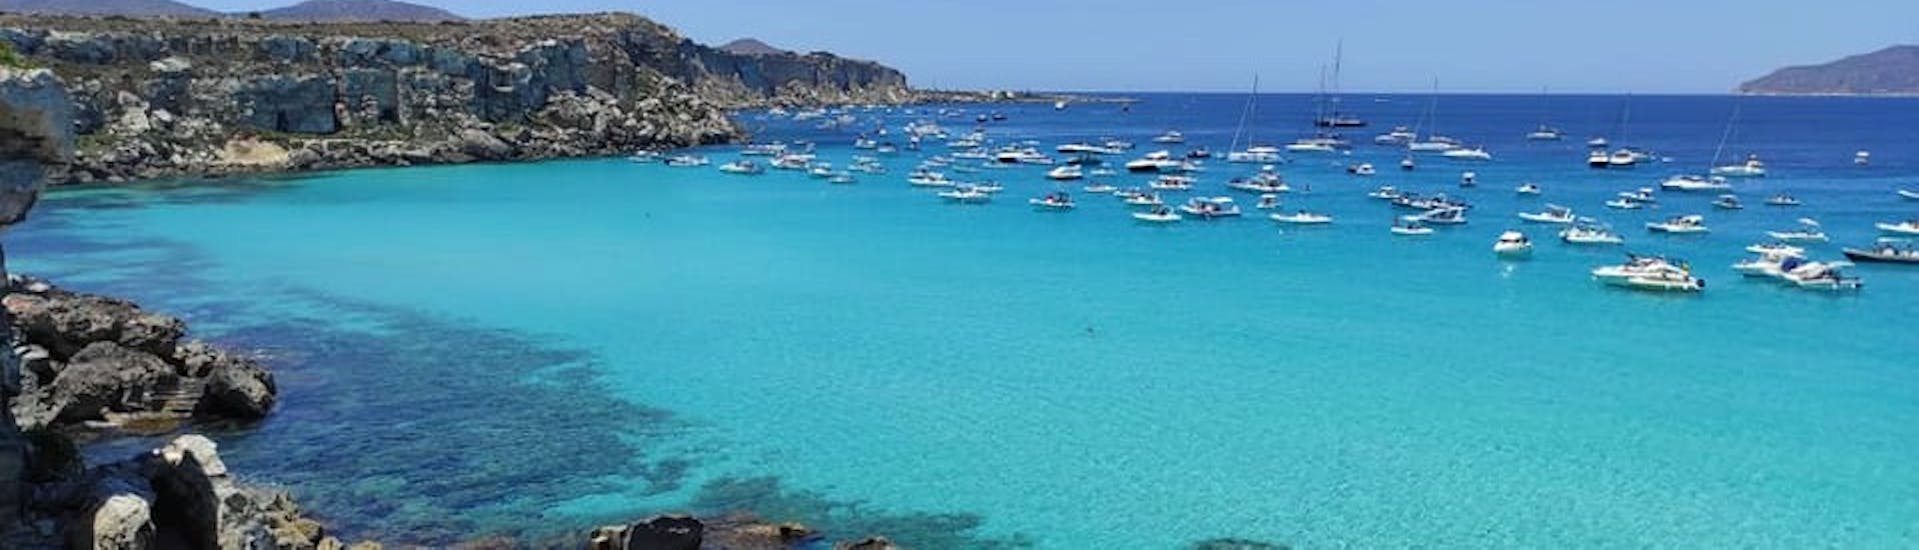 A beautiful beach in the Egadi archipelago to visit during a private boat trip from Trapani to Favignana and Levanzo with Egadi Sea & Boat.